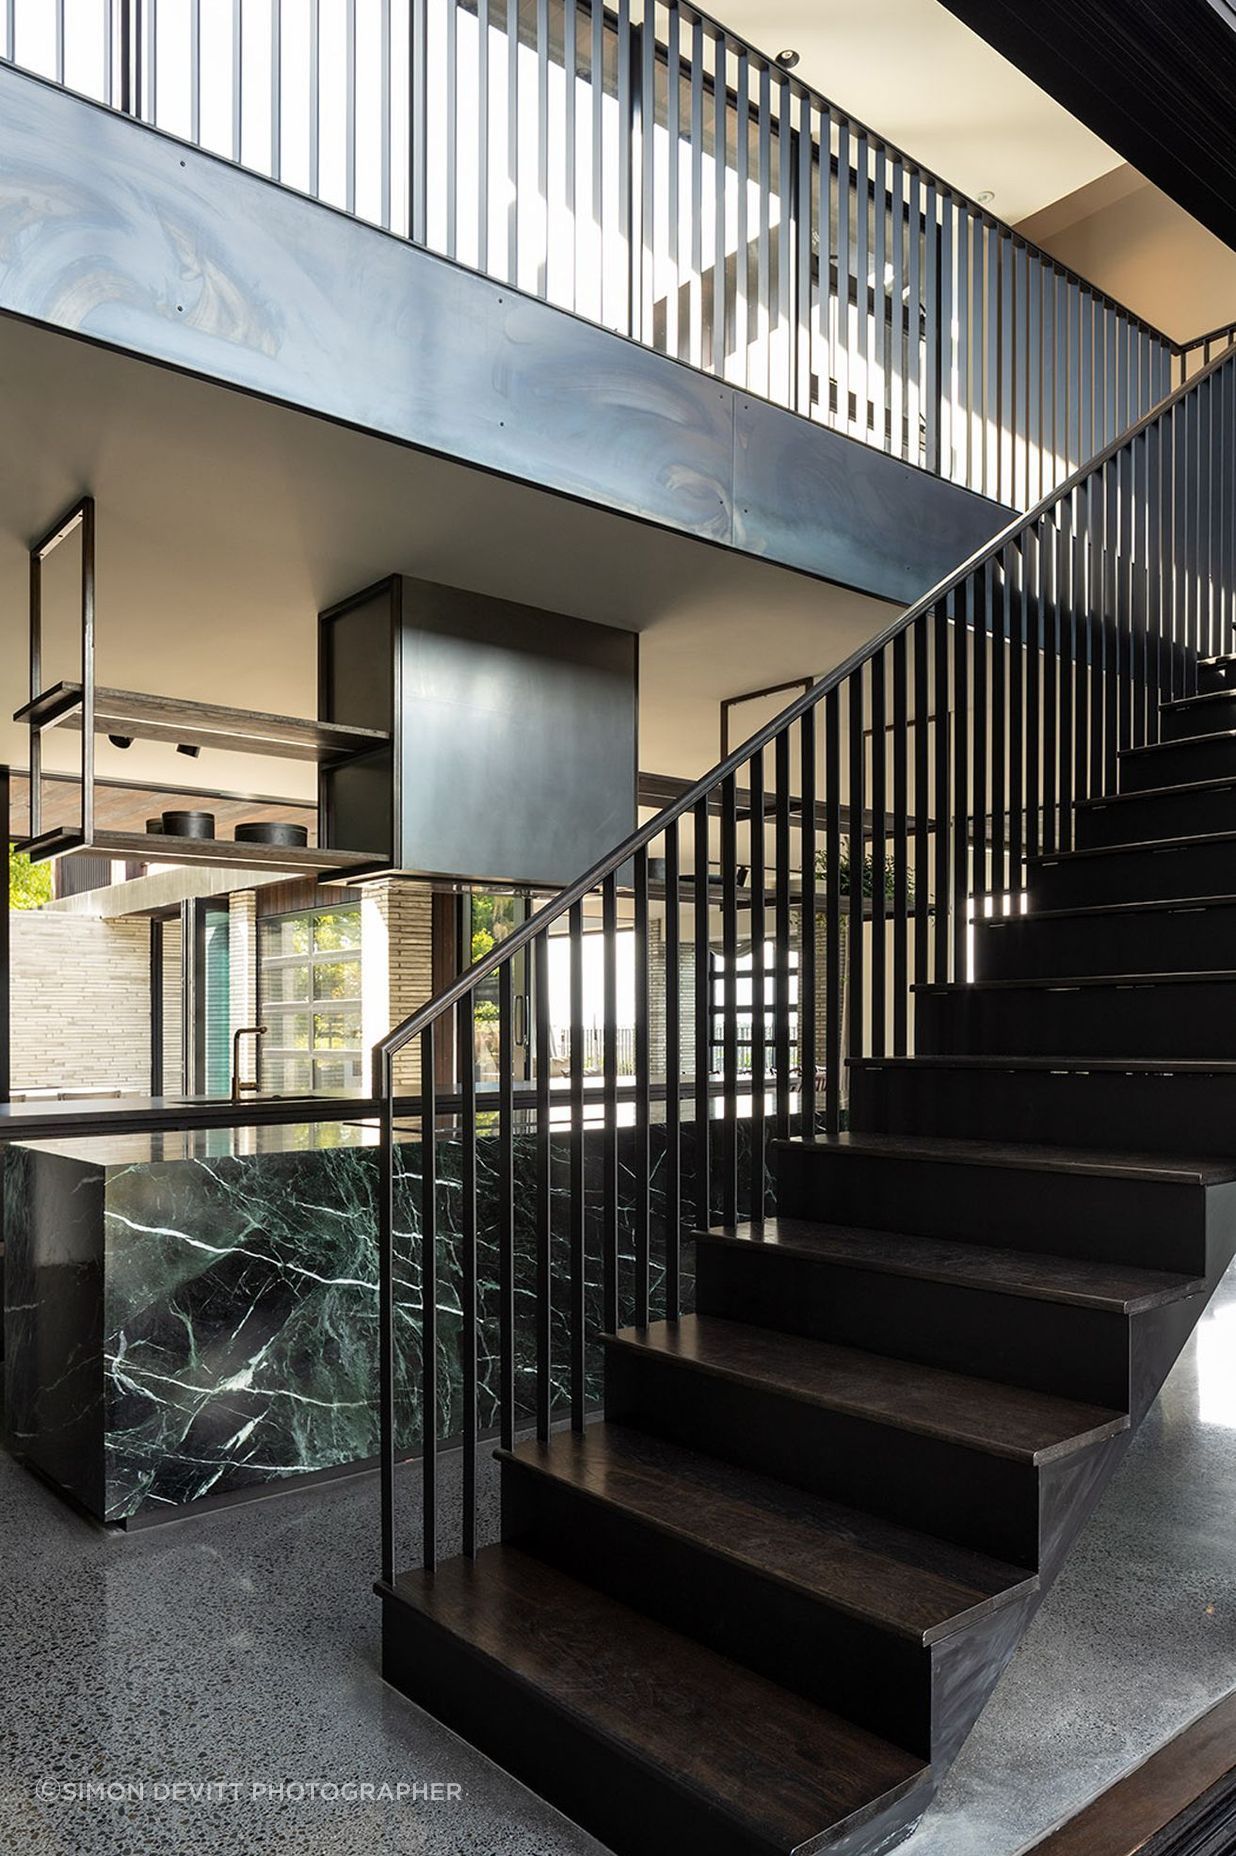 A striking steel balustrade leads to the upper pavilion that houses the private areas of the house.